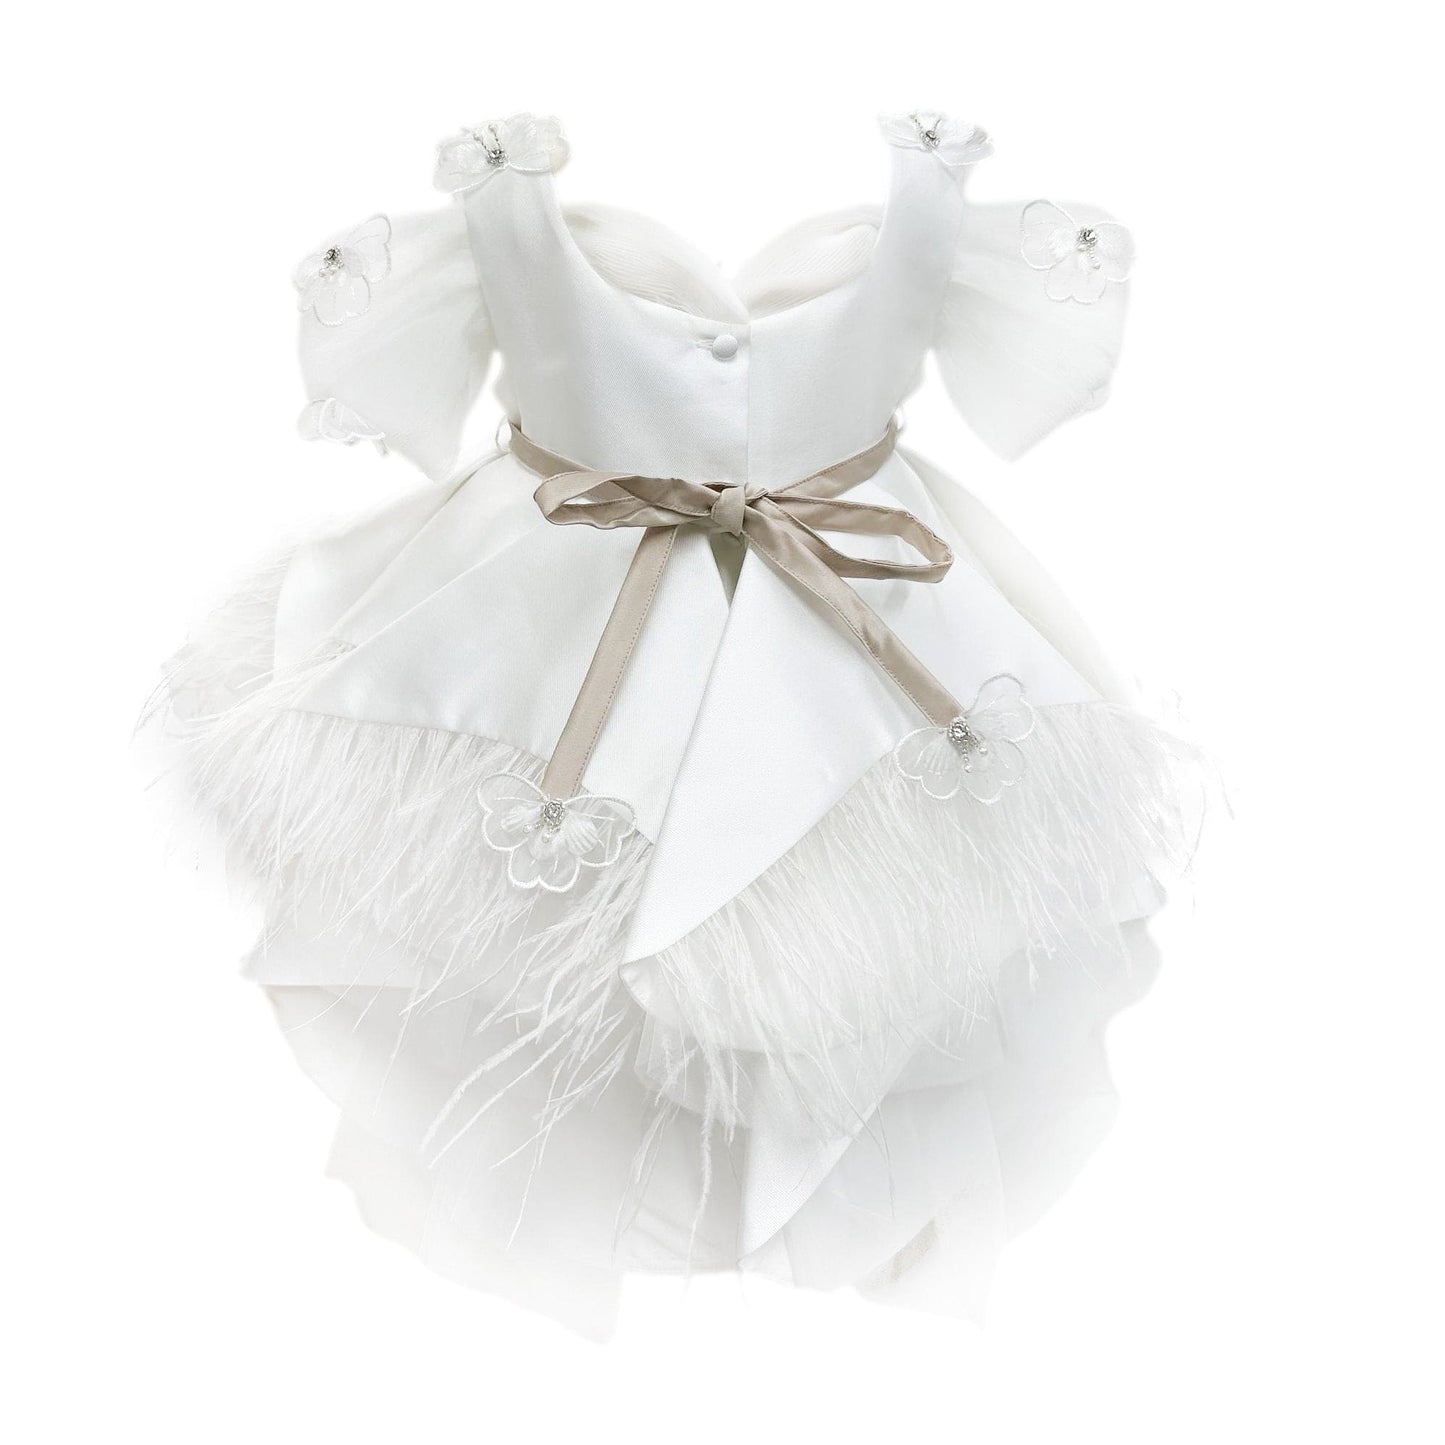 Constanza White Ceremony Dress with Champagne Bow